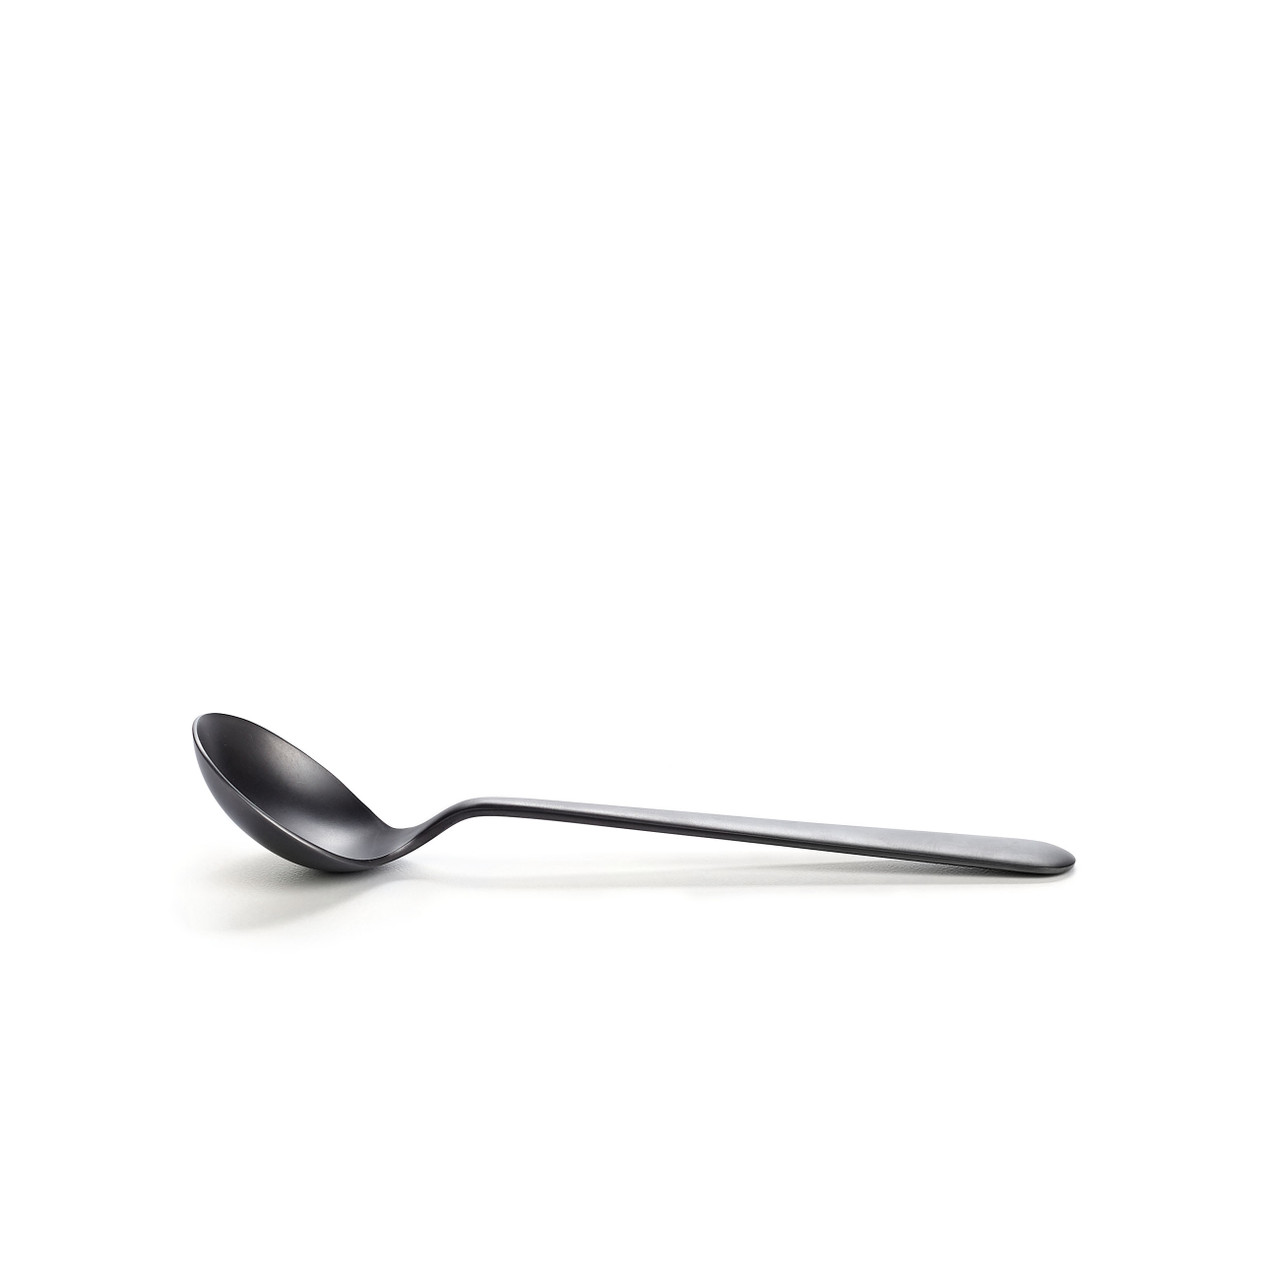 https://cdn11.bigcommerce.com/s-6h7ychjk4/images/stencil/1280x1280/products/8176/89290/hario-kasuya-cupping-spoon-matte-black-side__14417.1597181749.jpg?c=1&imbypass=on